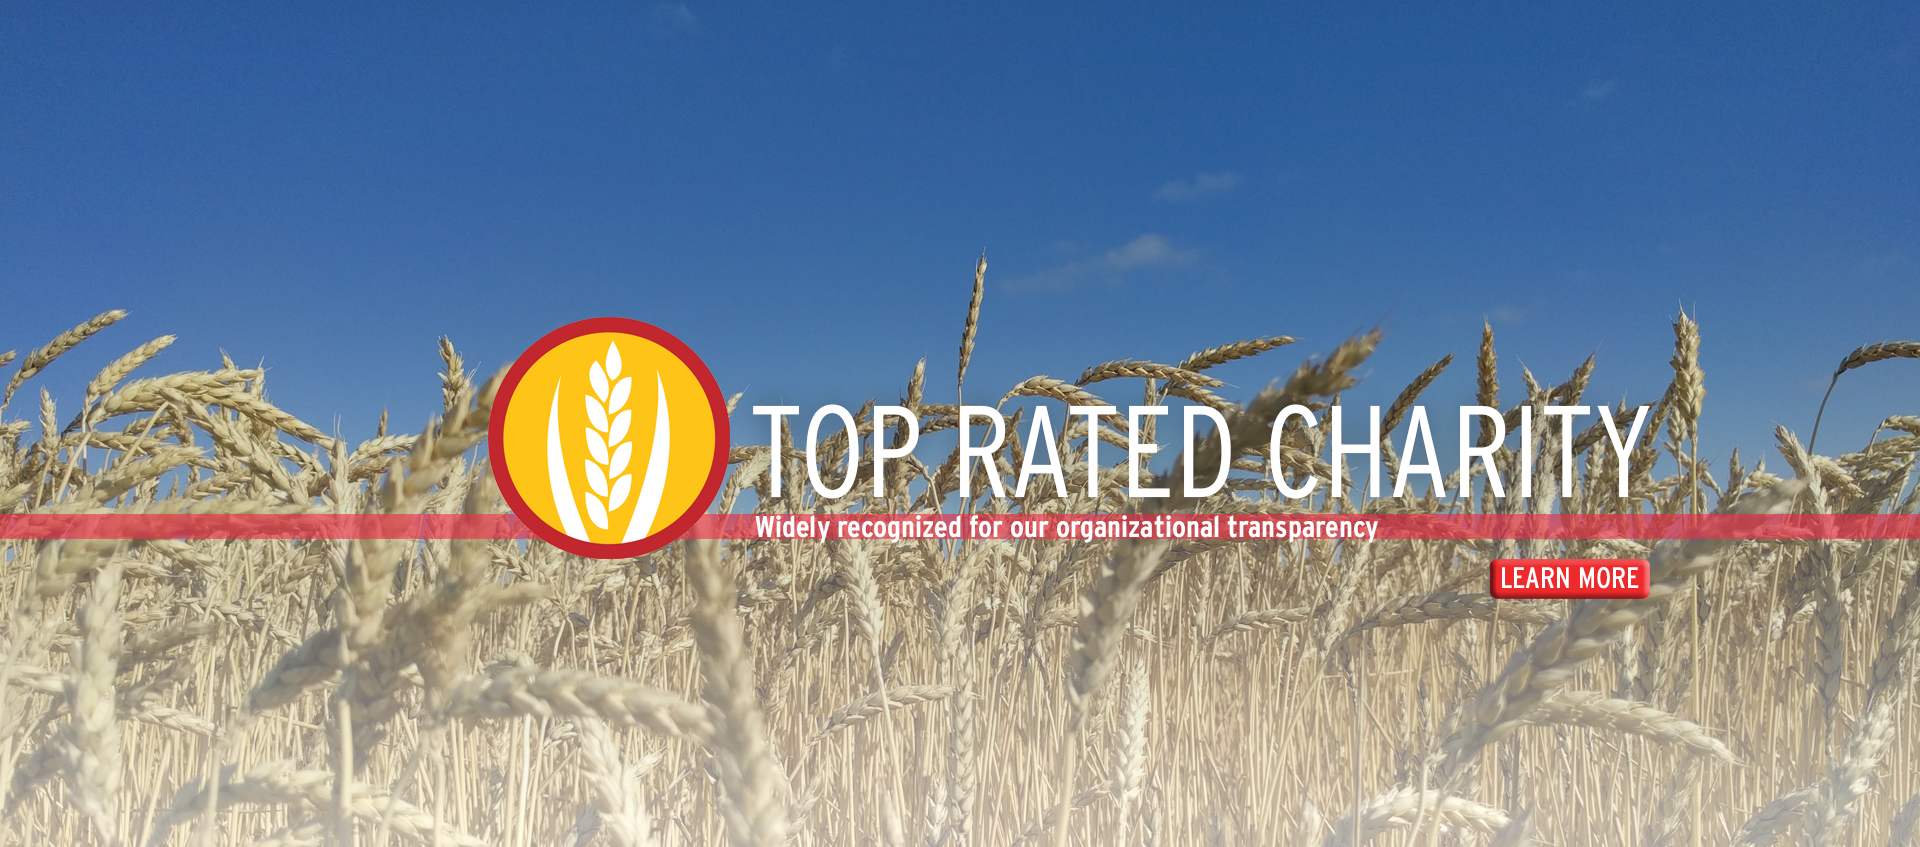 Top Rated Charity